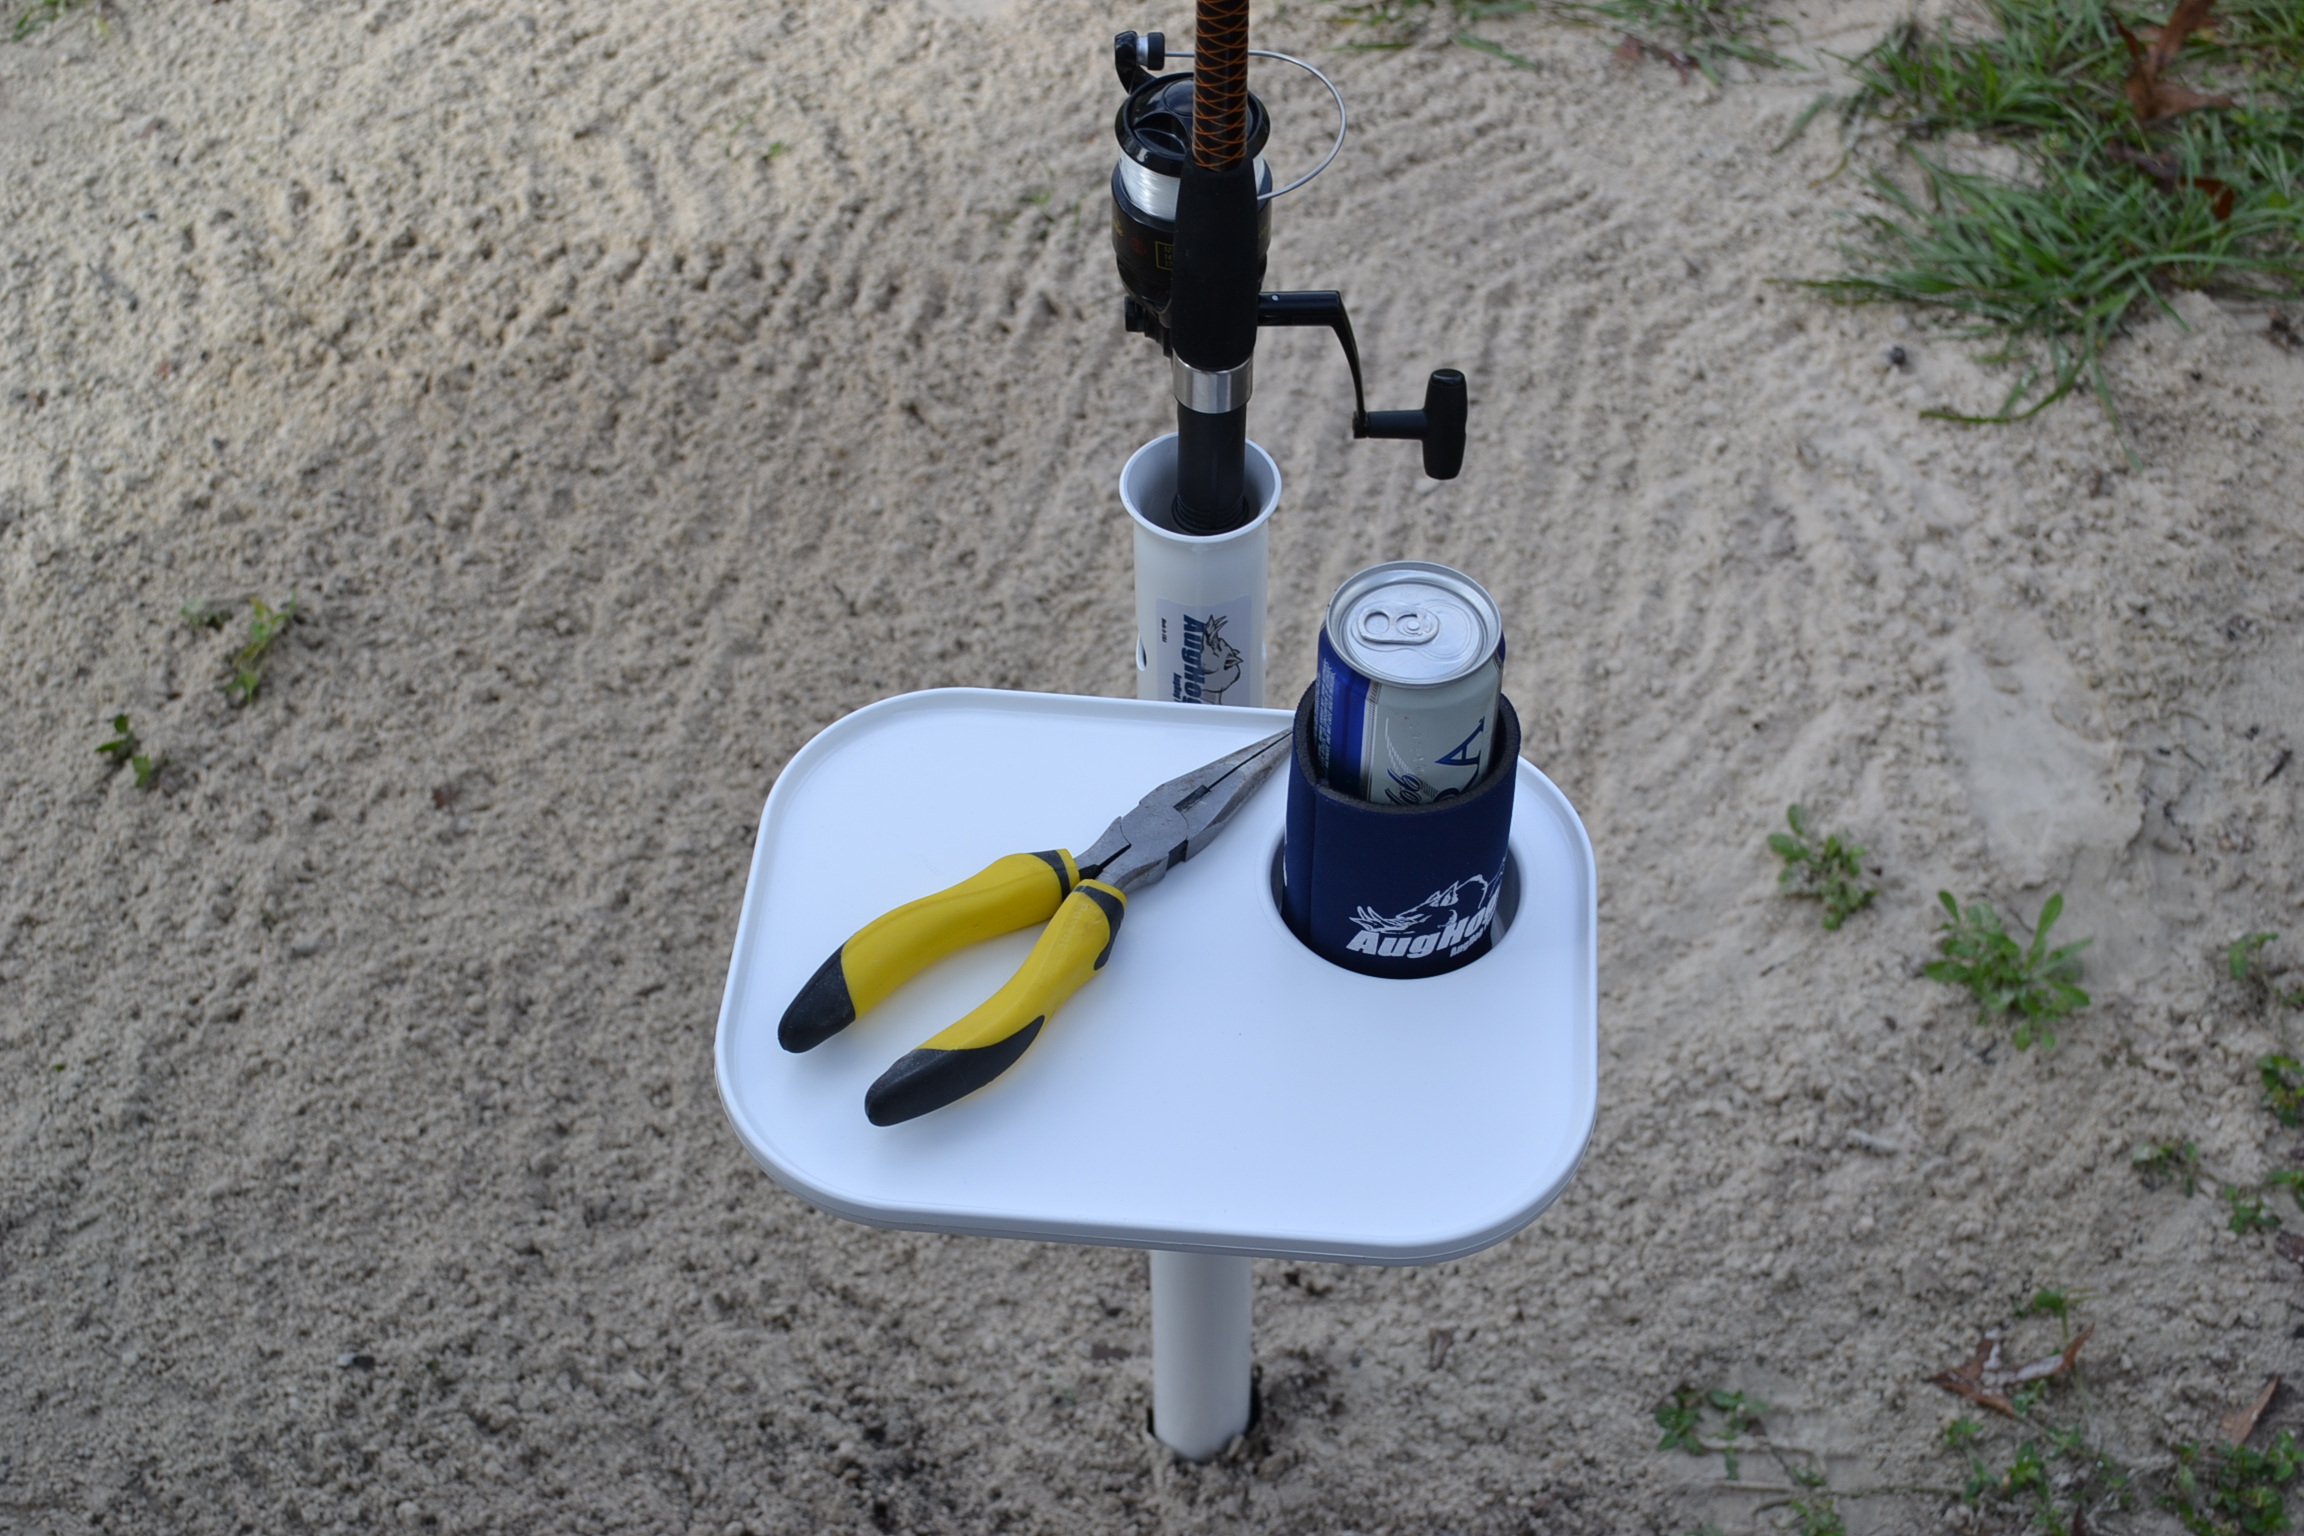 HOW TO INSTALL PVC BEACH ROD HOLDER THE EASY WAY!!! 